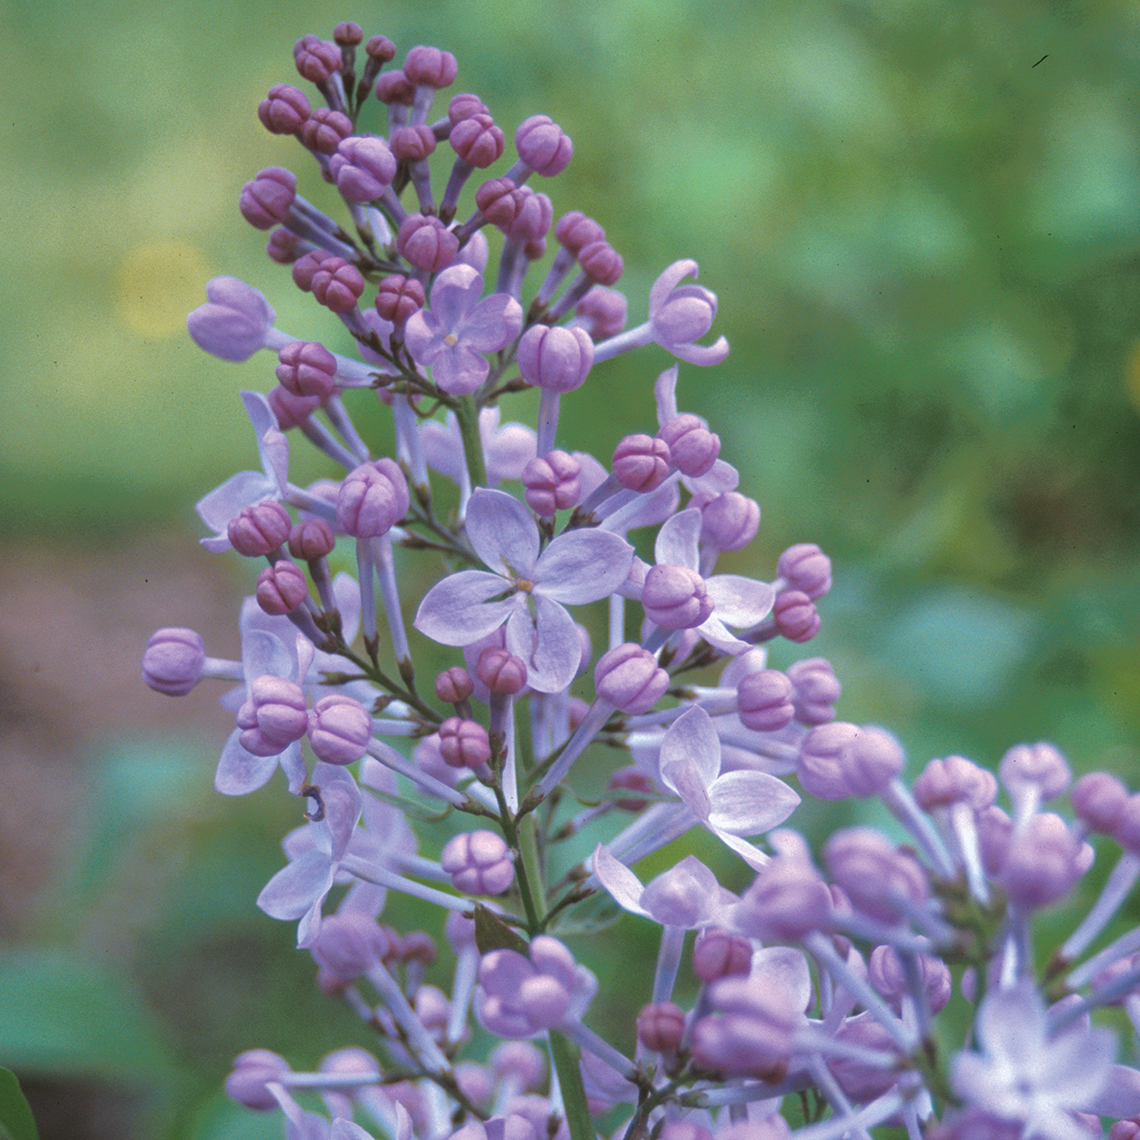 Closeup of an inflorescence of Excel syringa showing single purple florets